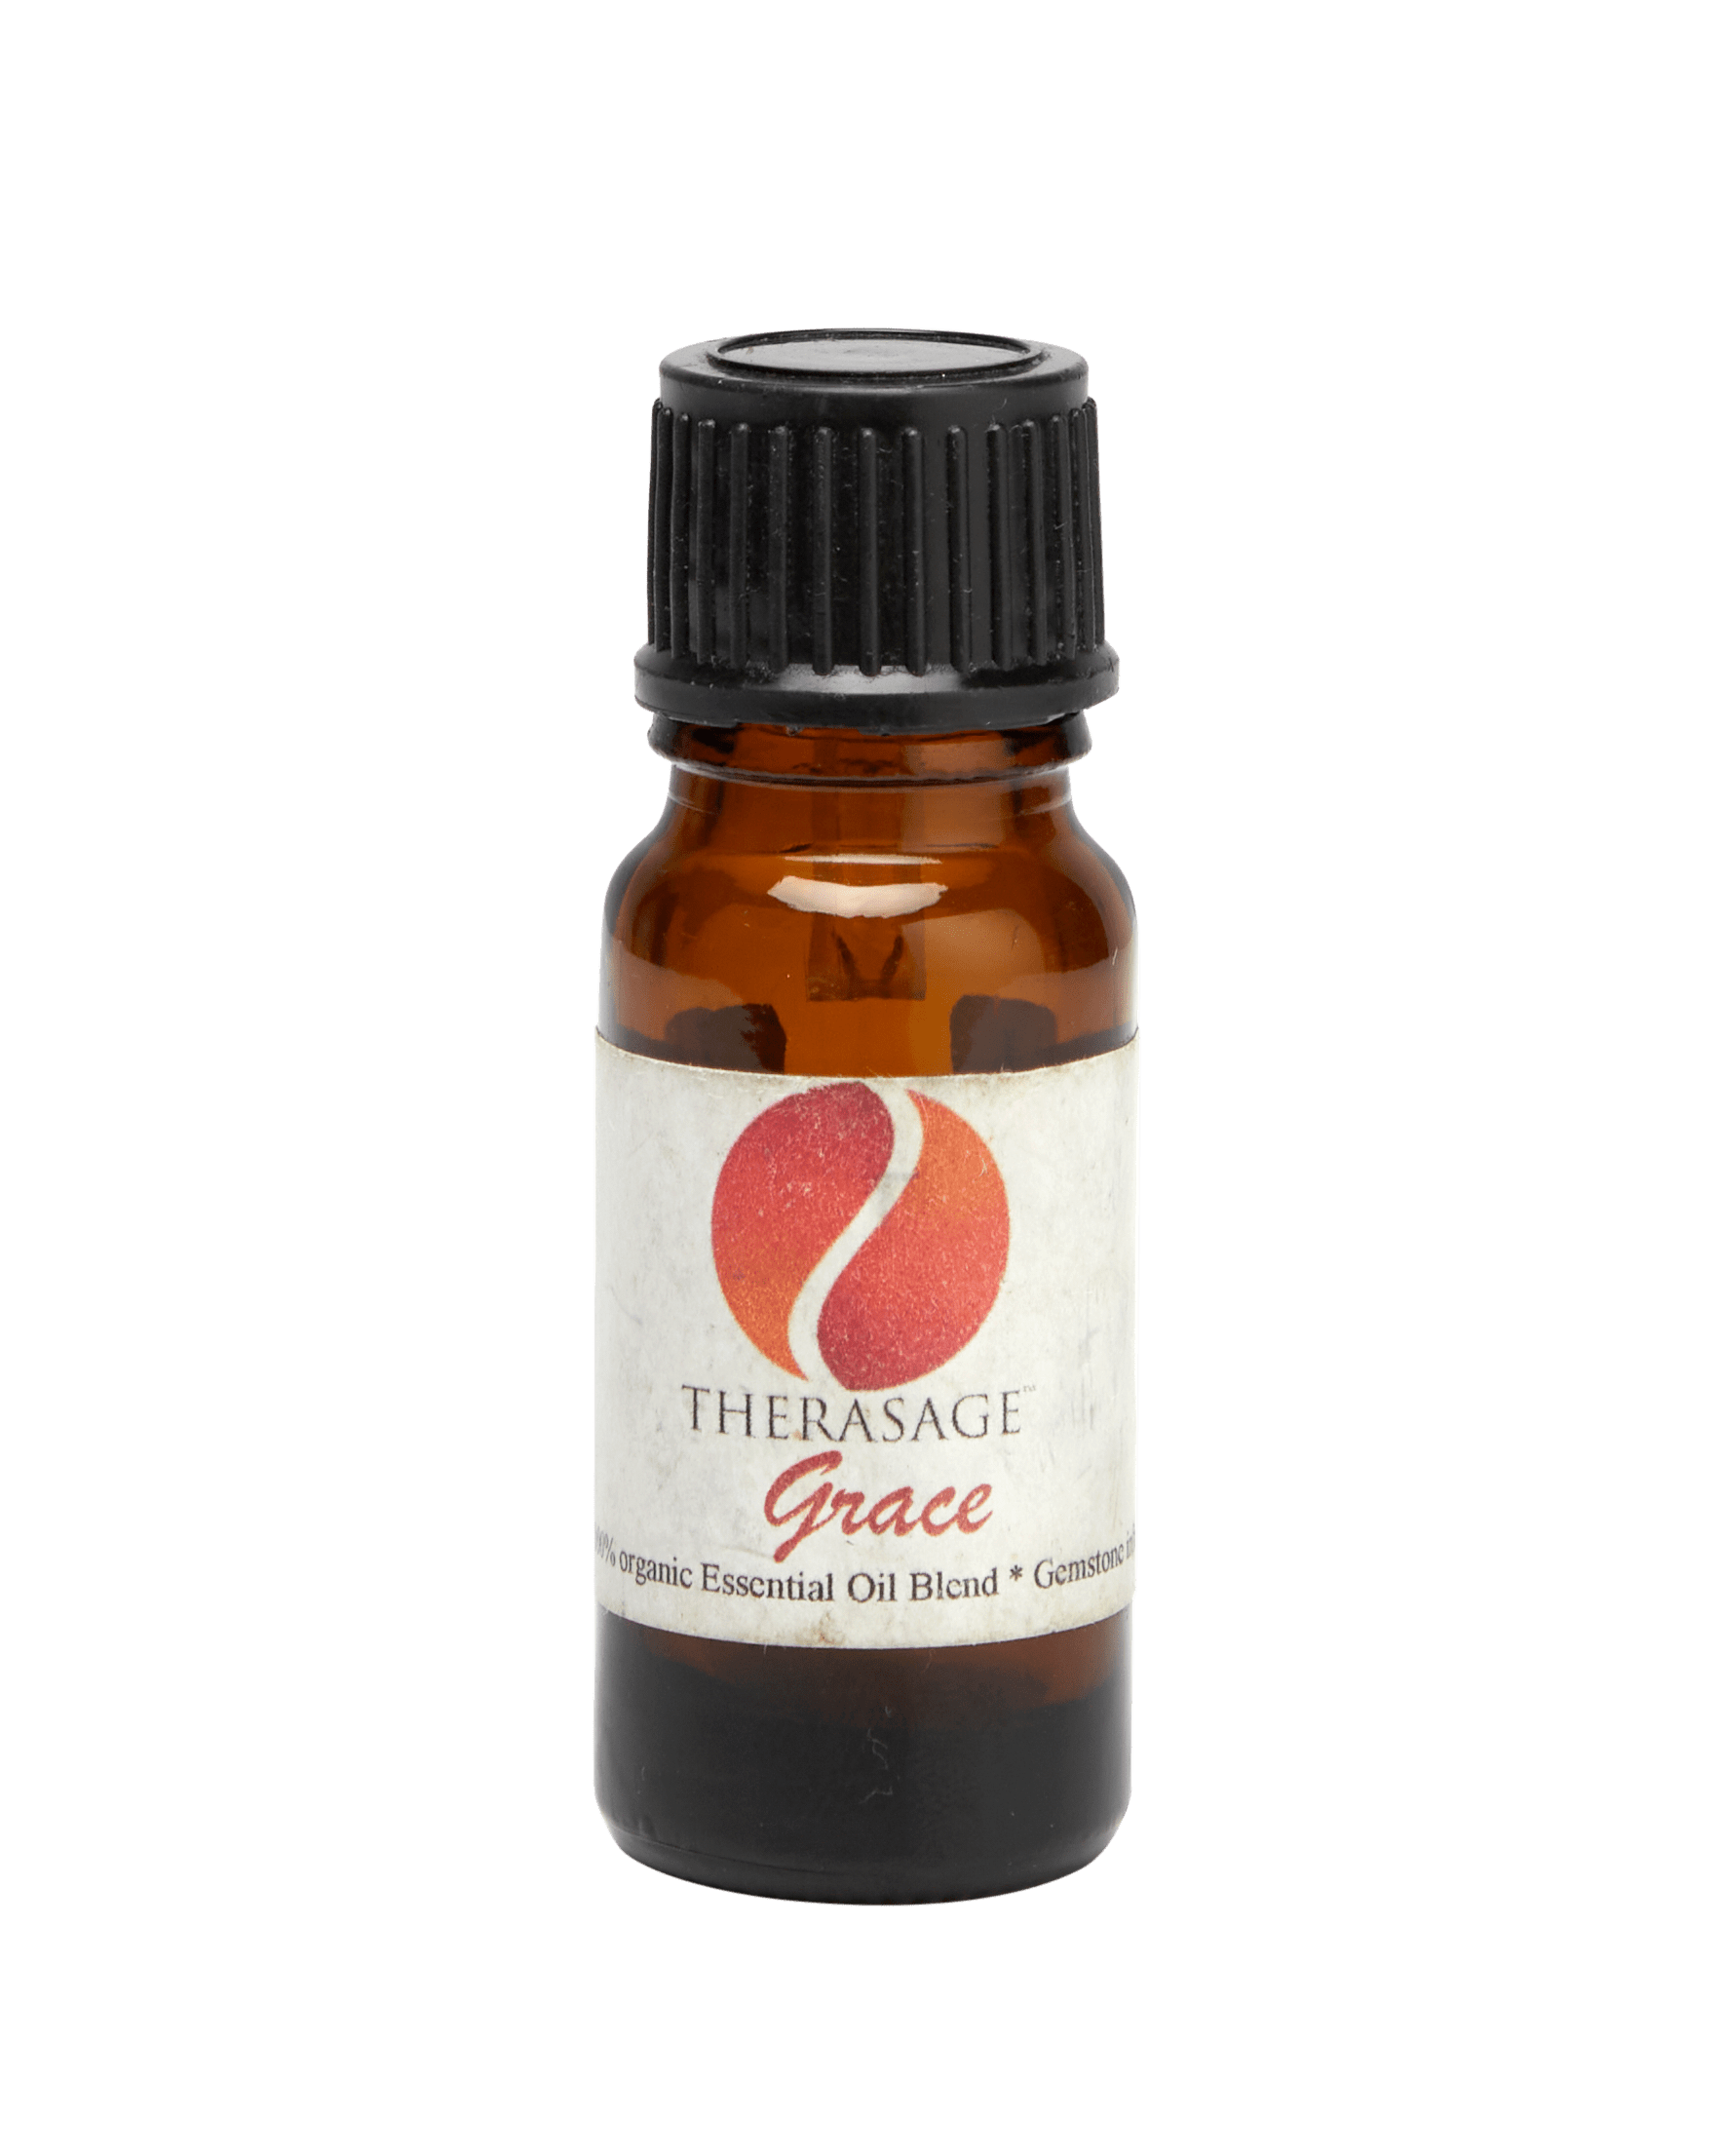 Therasage All Grace Therasage TheraEssential Oil Blend